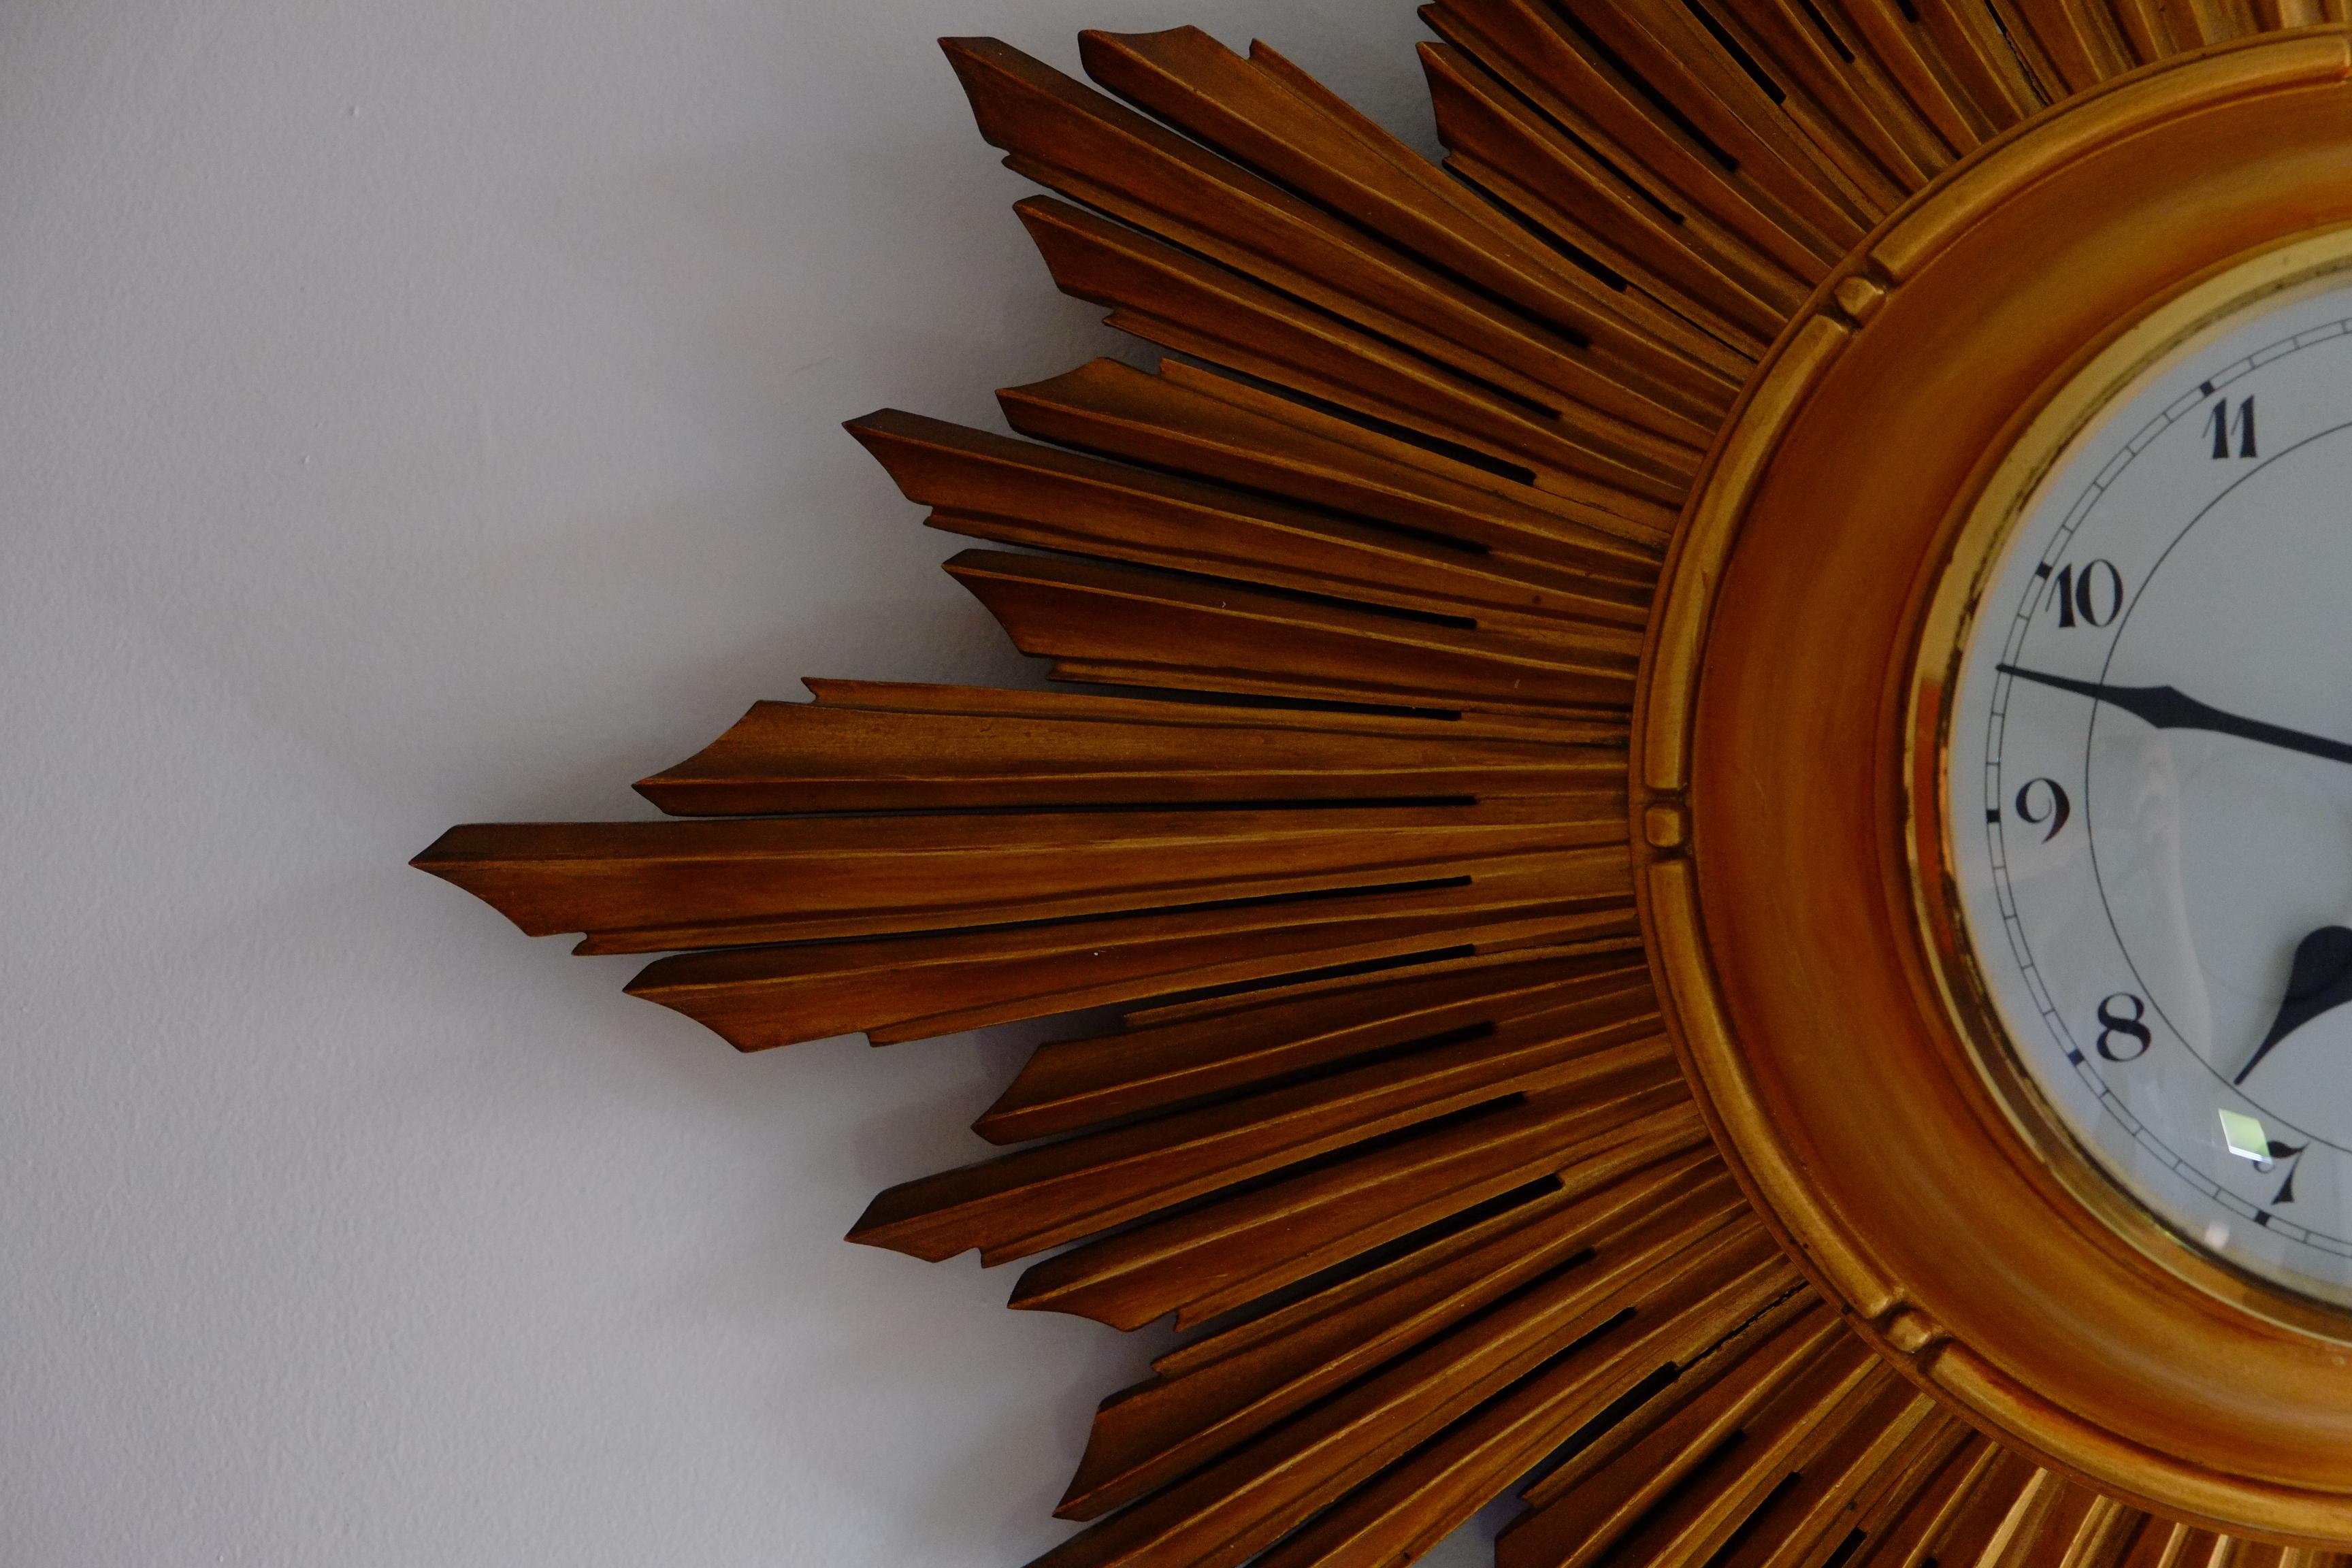 English Rare Gilt Wood Smiths Gold Sunburst Wall Clock. Made in England For Sale